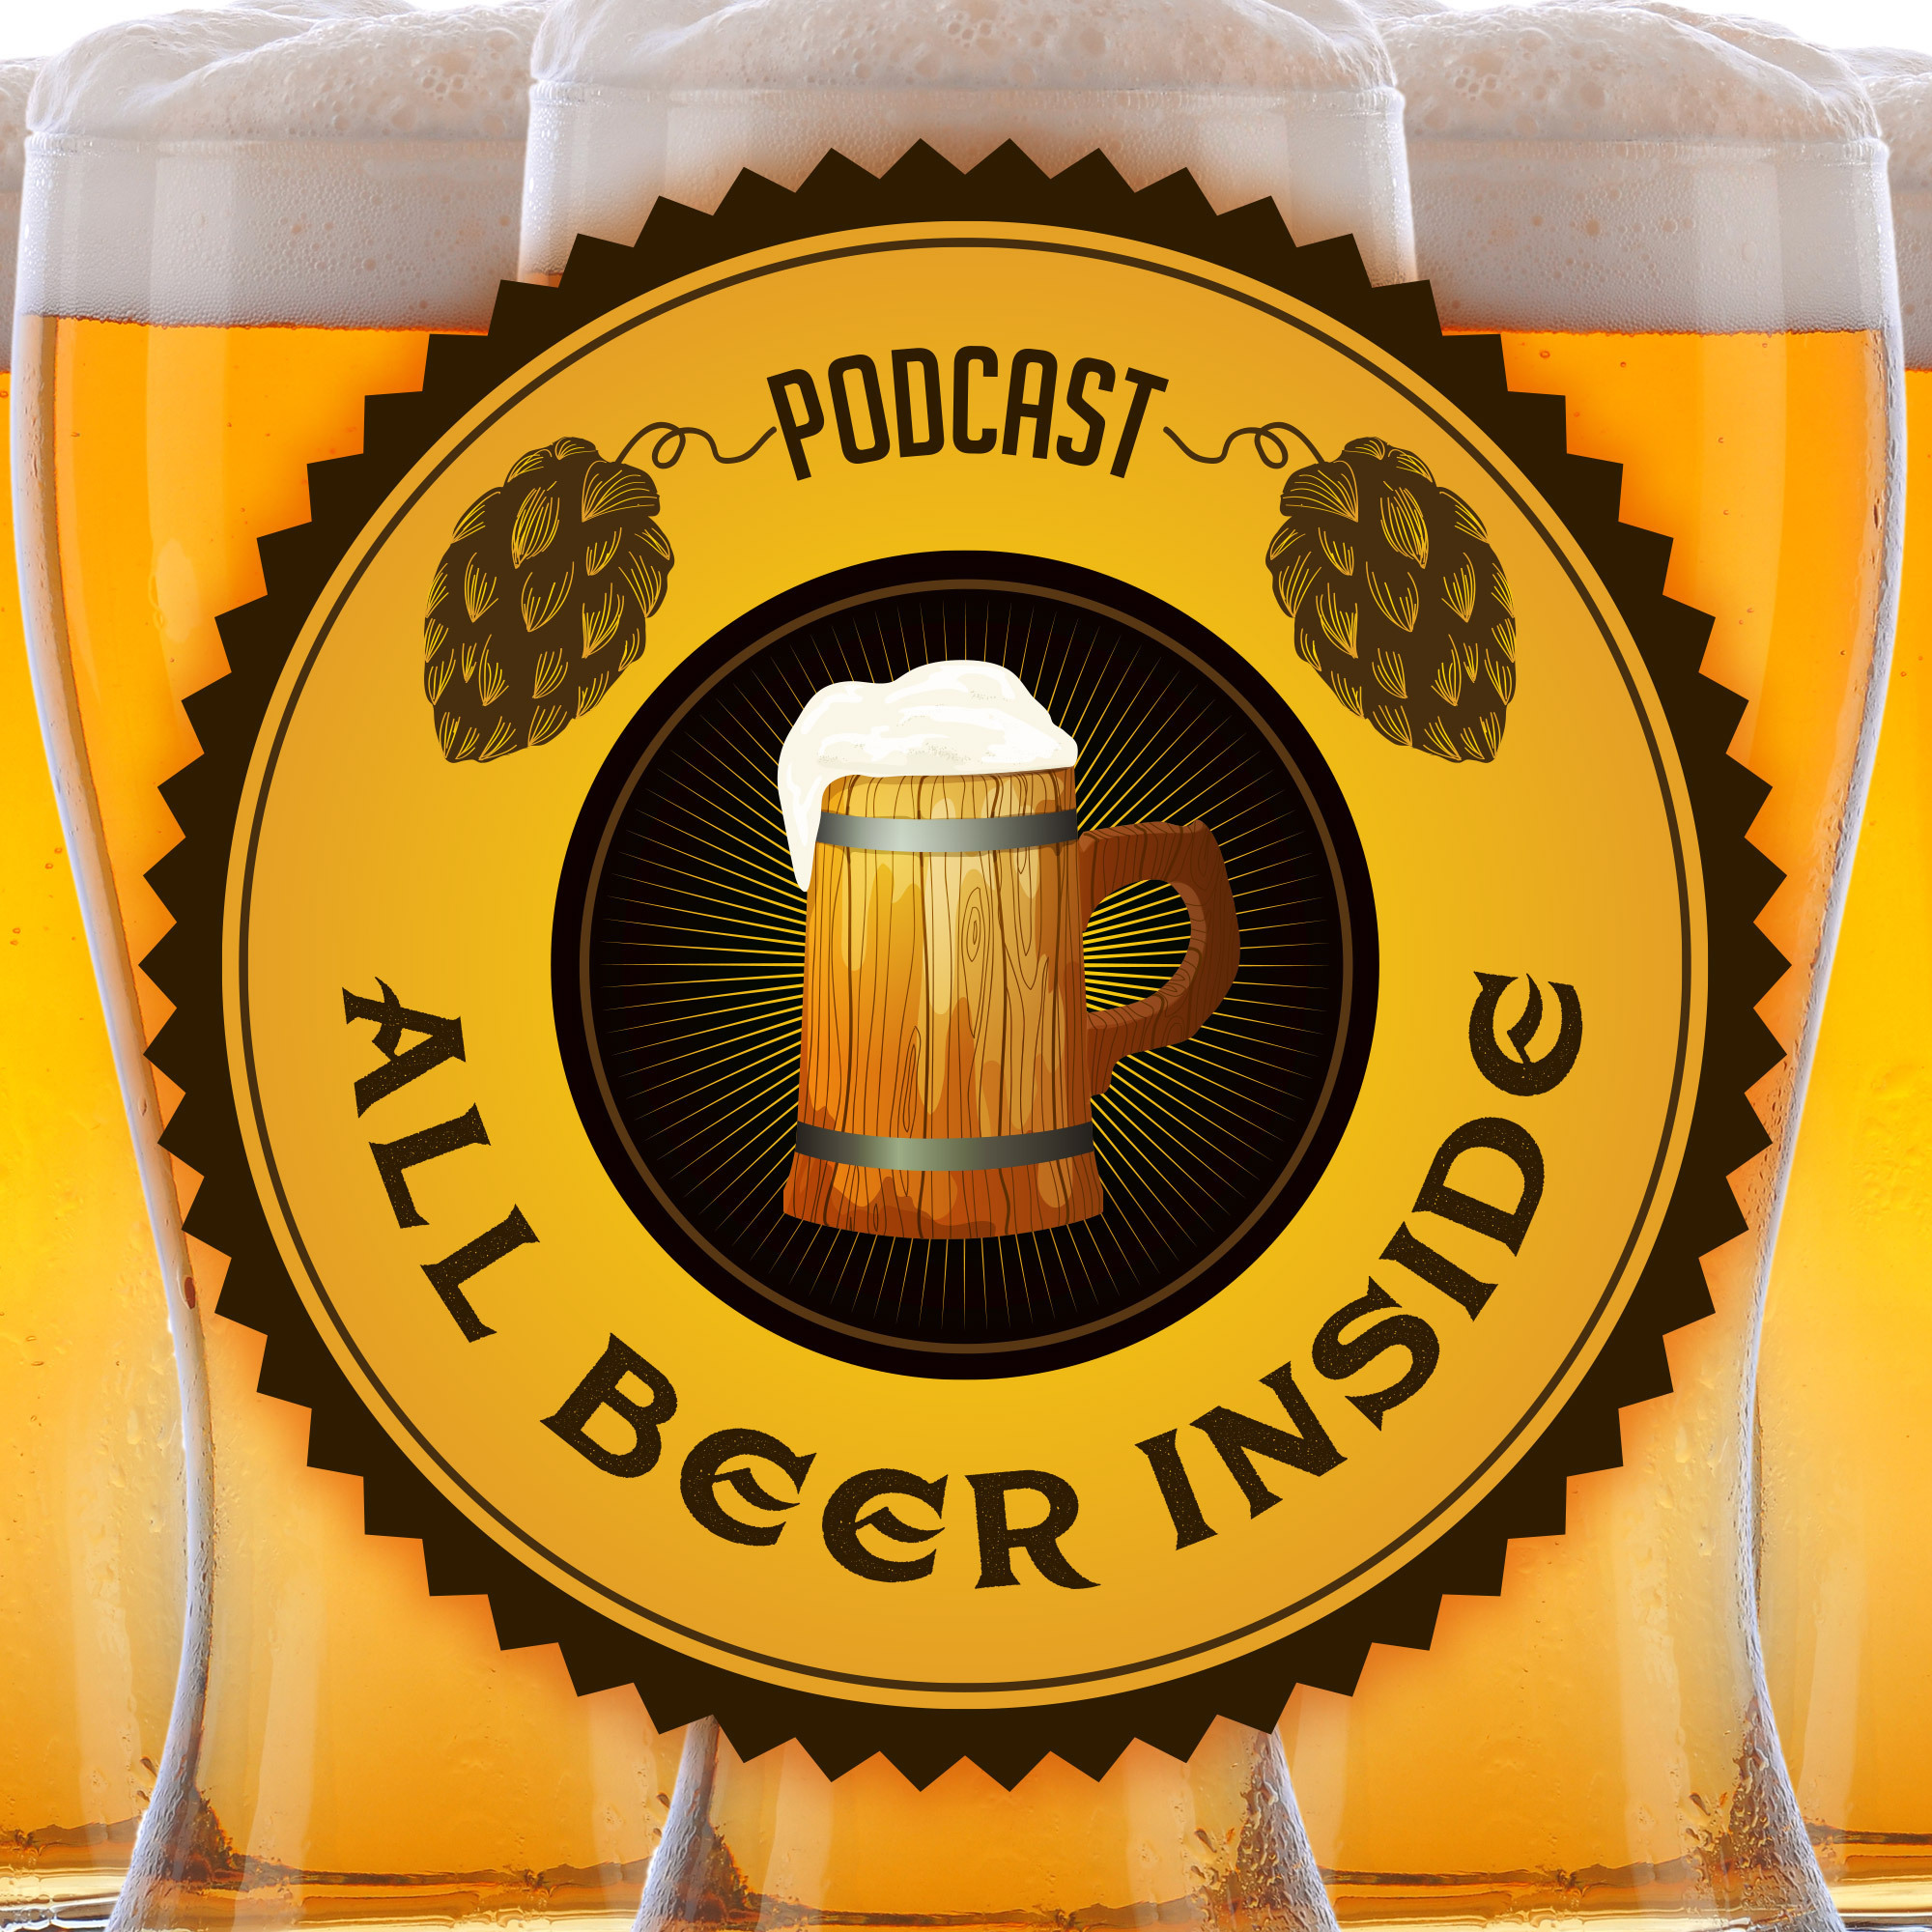 All Beer Inside Episode 38 Part 2 - Drinking by Yourself; Jerkin it all the Time